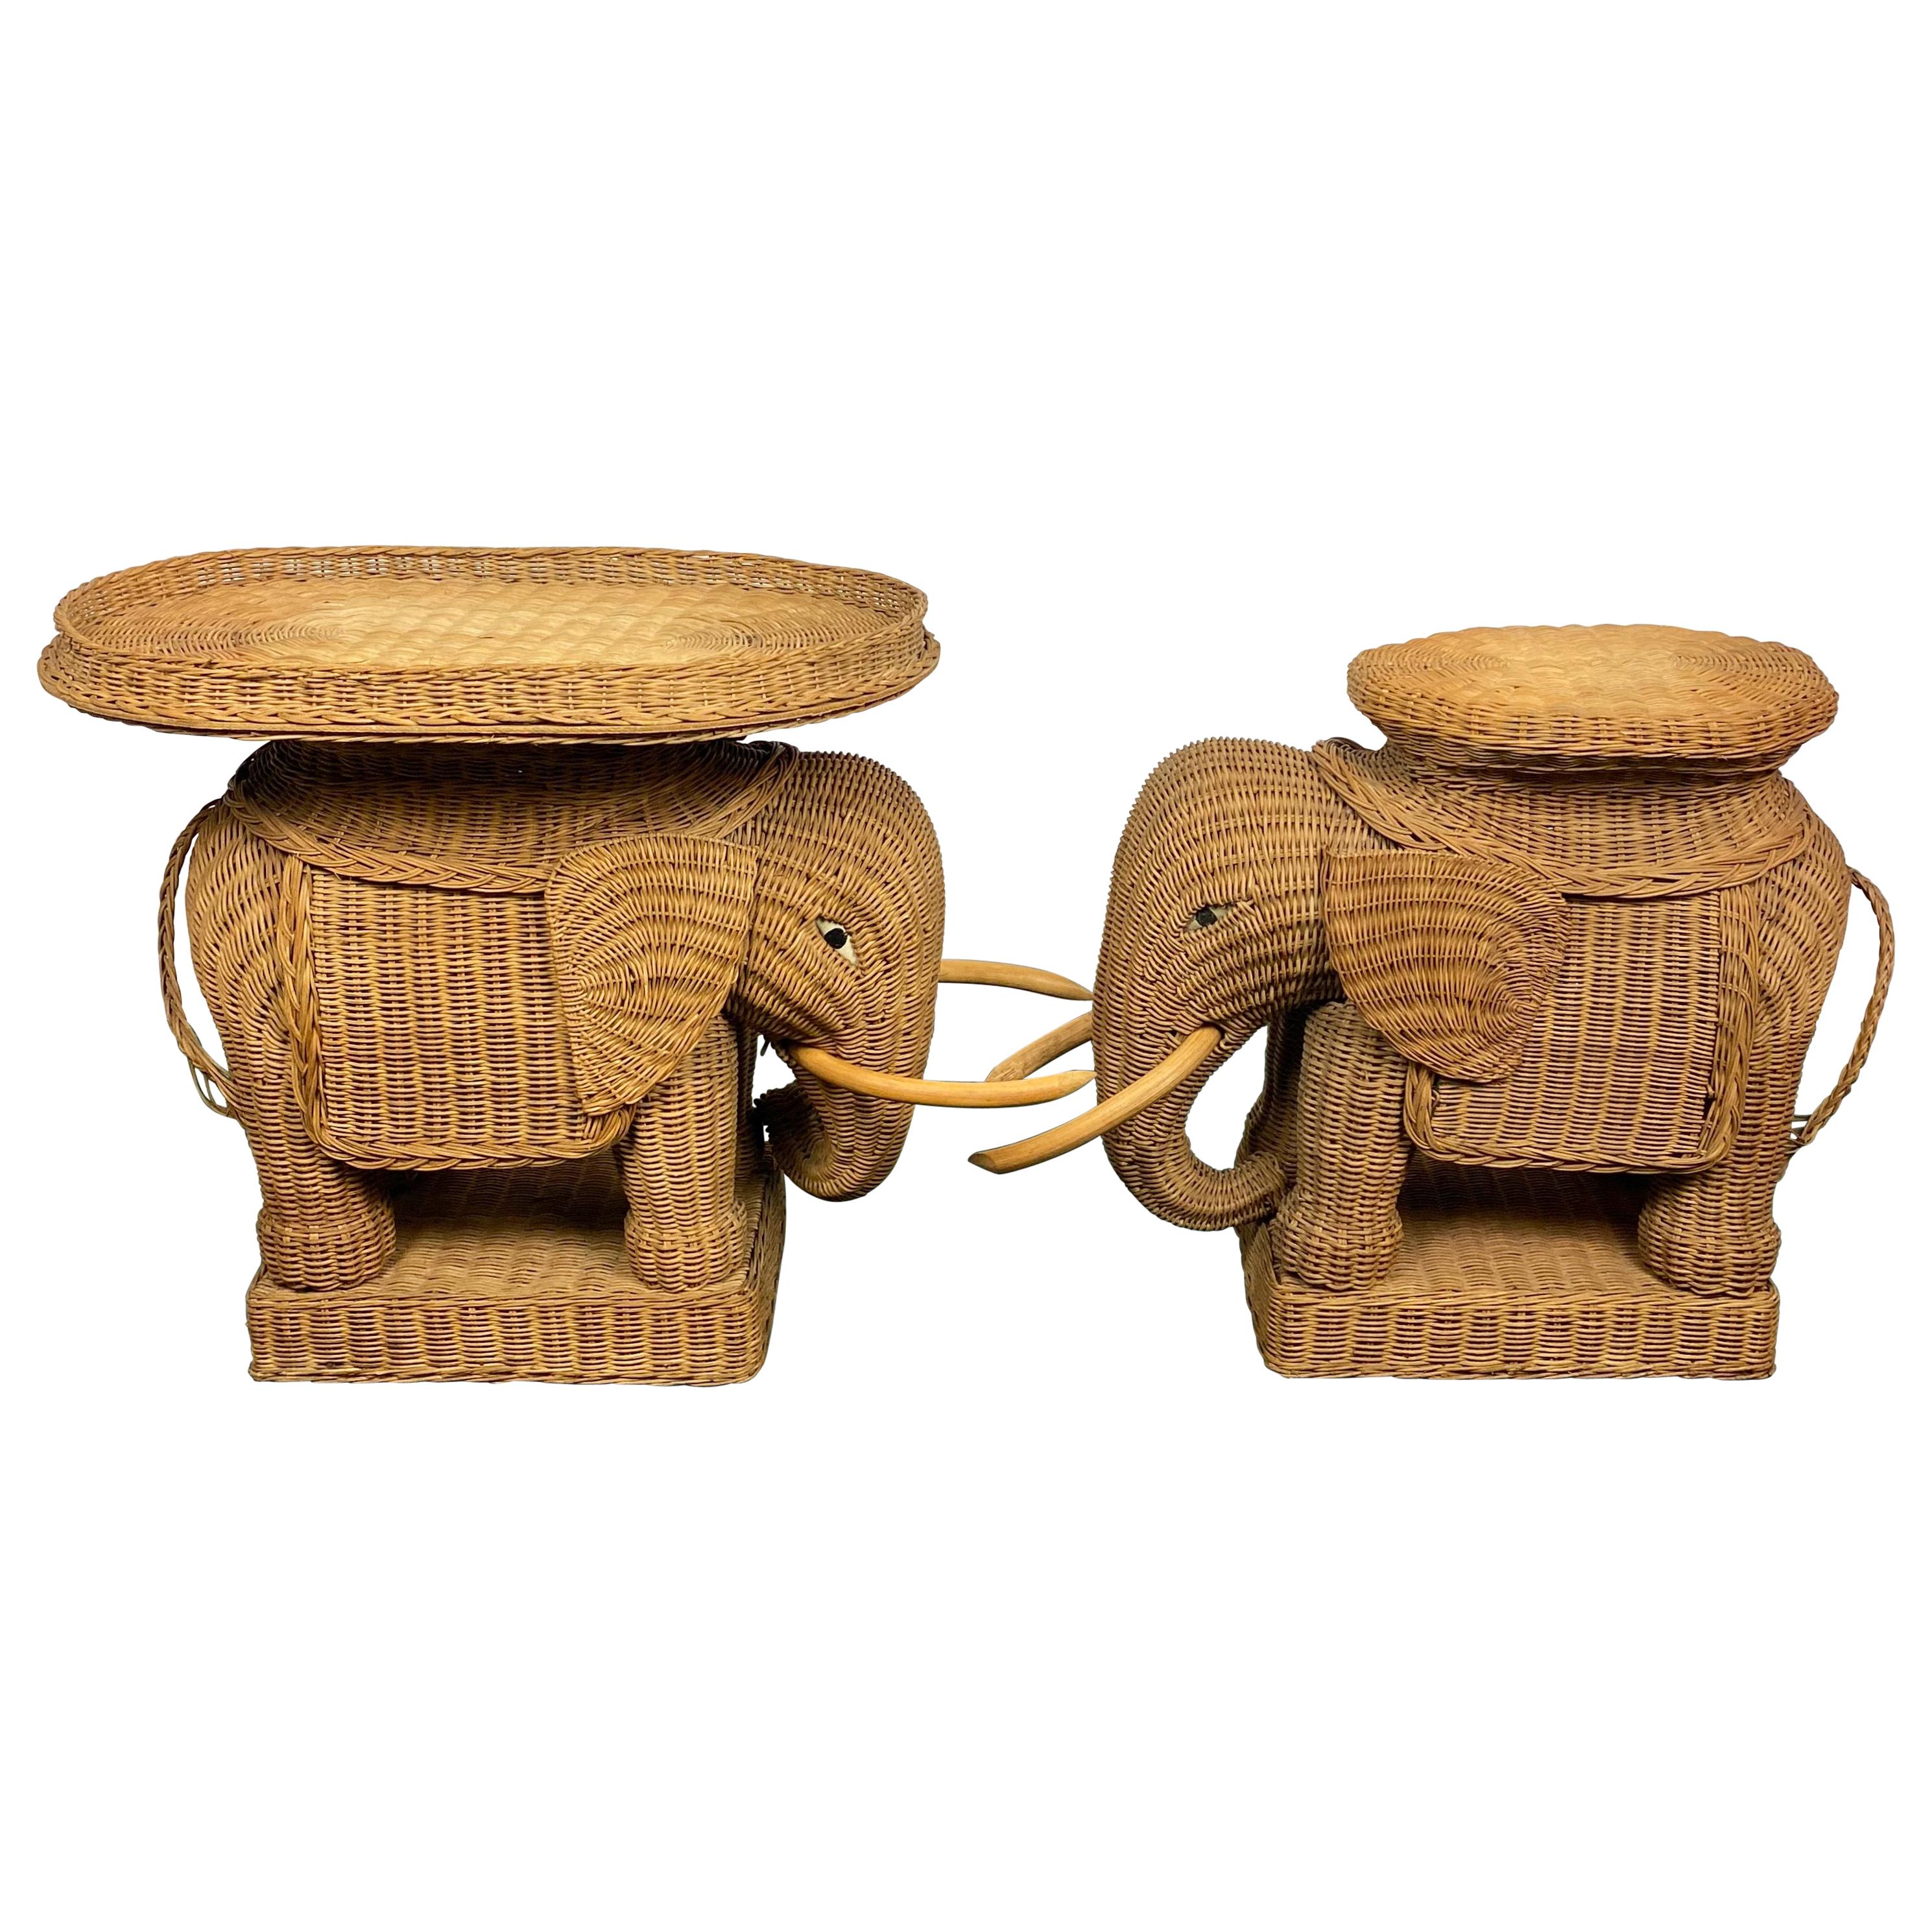 Pair of Rattan Wicker Elephant Tray Tables and Side Tables, France, 1960s